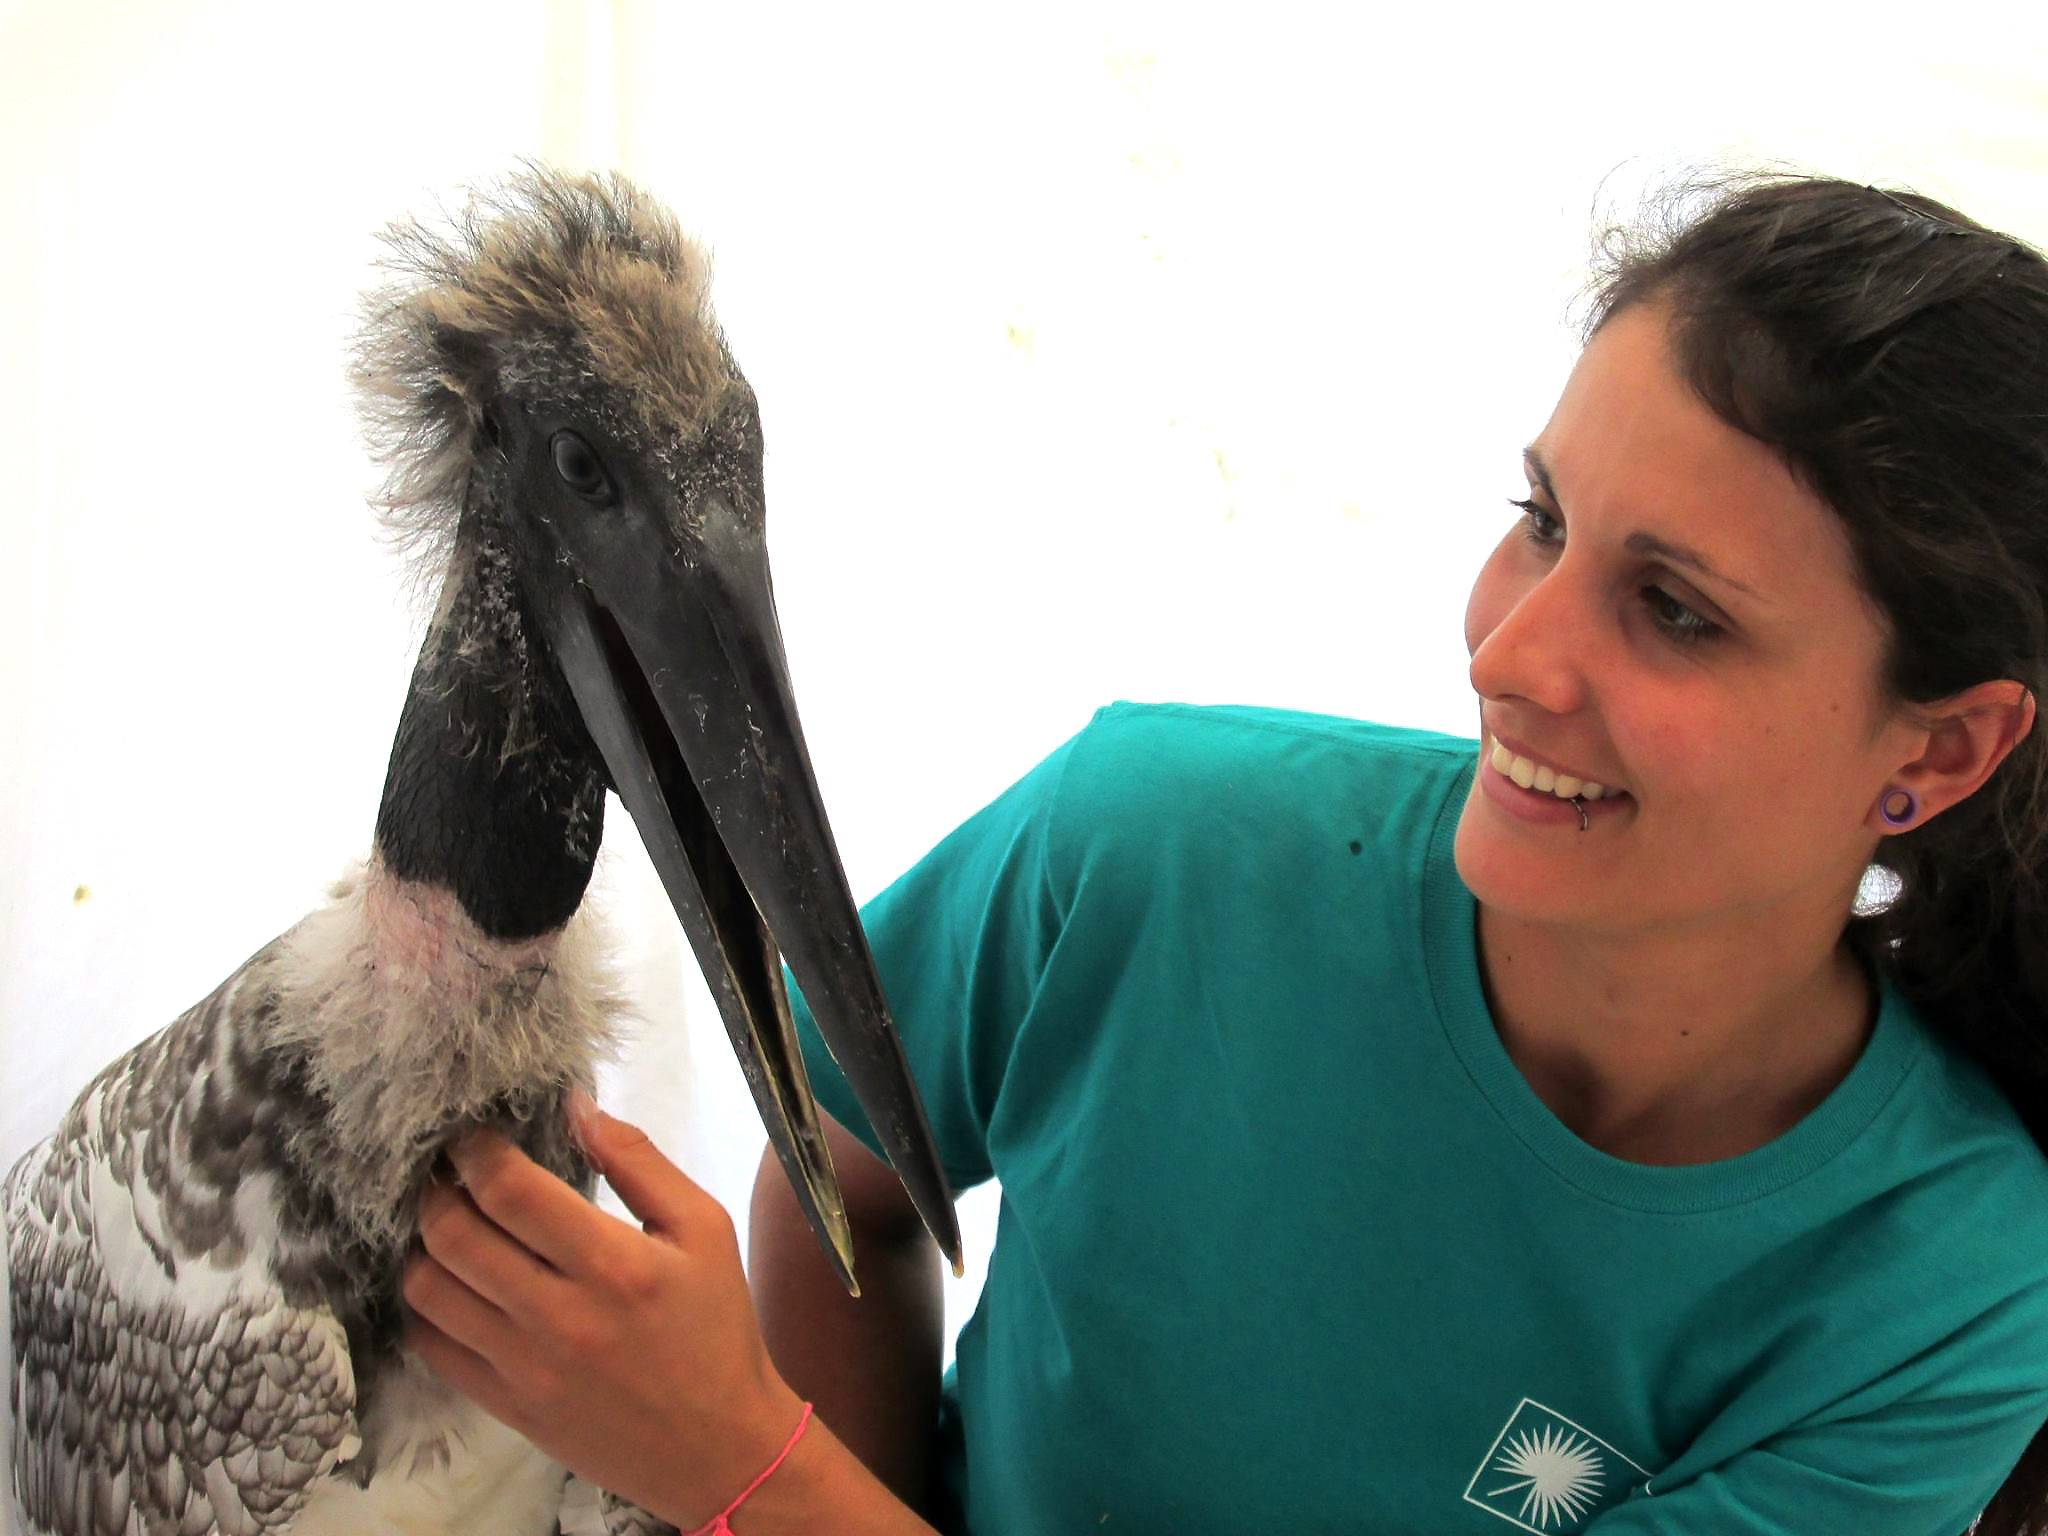 A Belize Zoo Jabiru Rescue - With assistance from other wildlife friends!